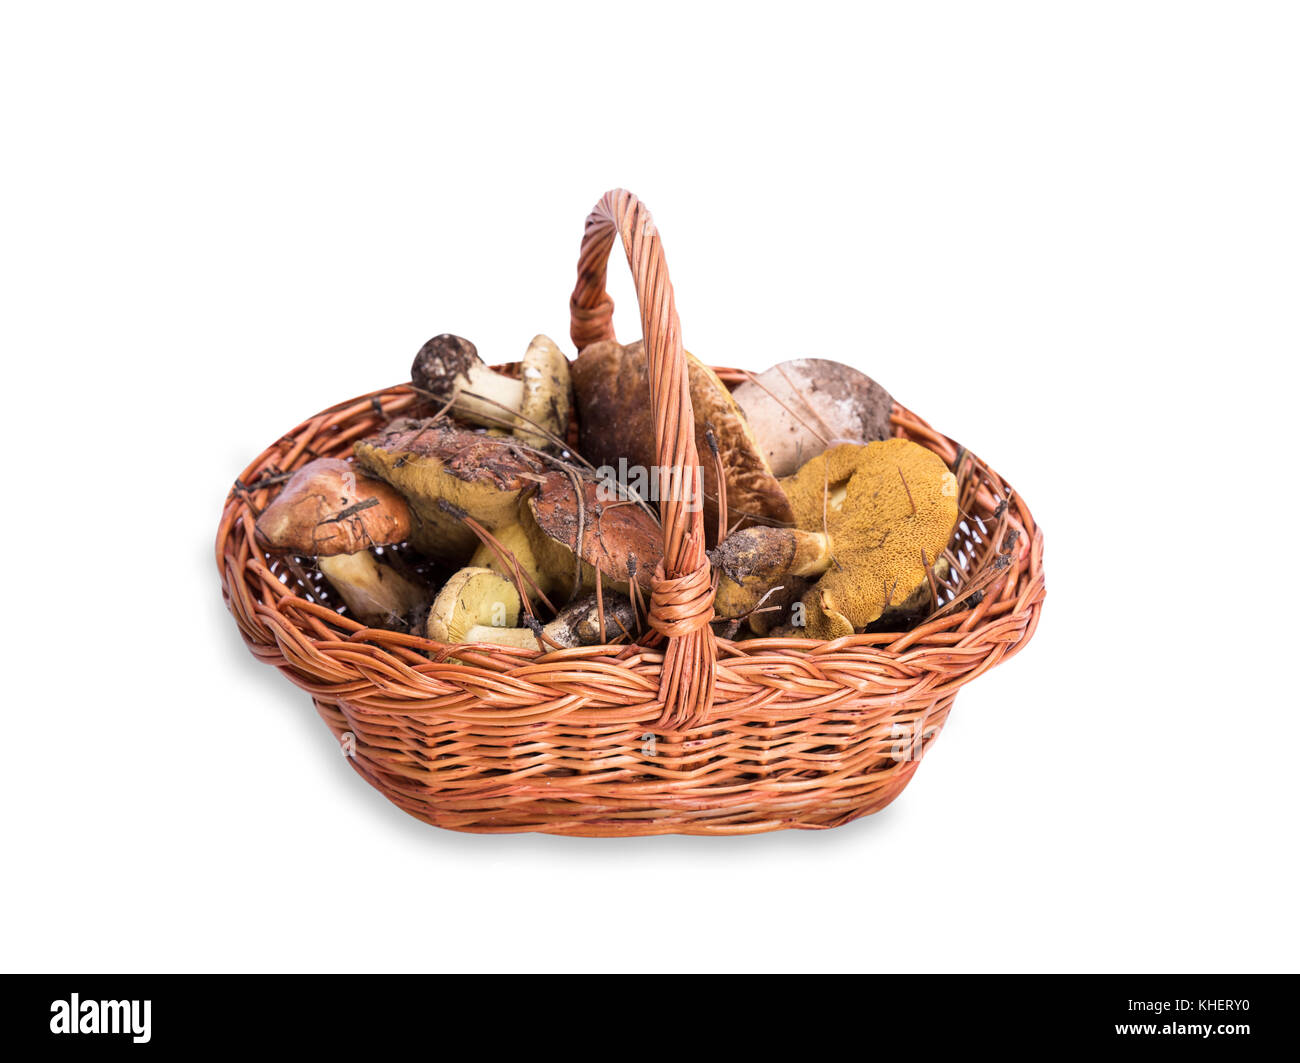 edible wild mushrooms in a brown wicker basket, isolated on white background Stock Photo